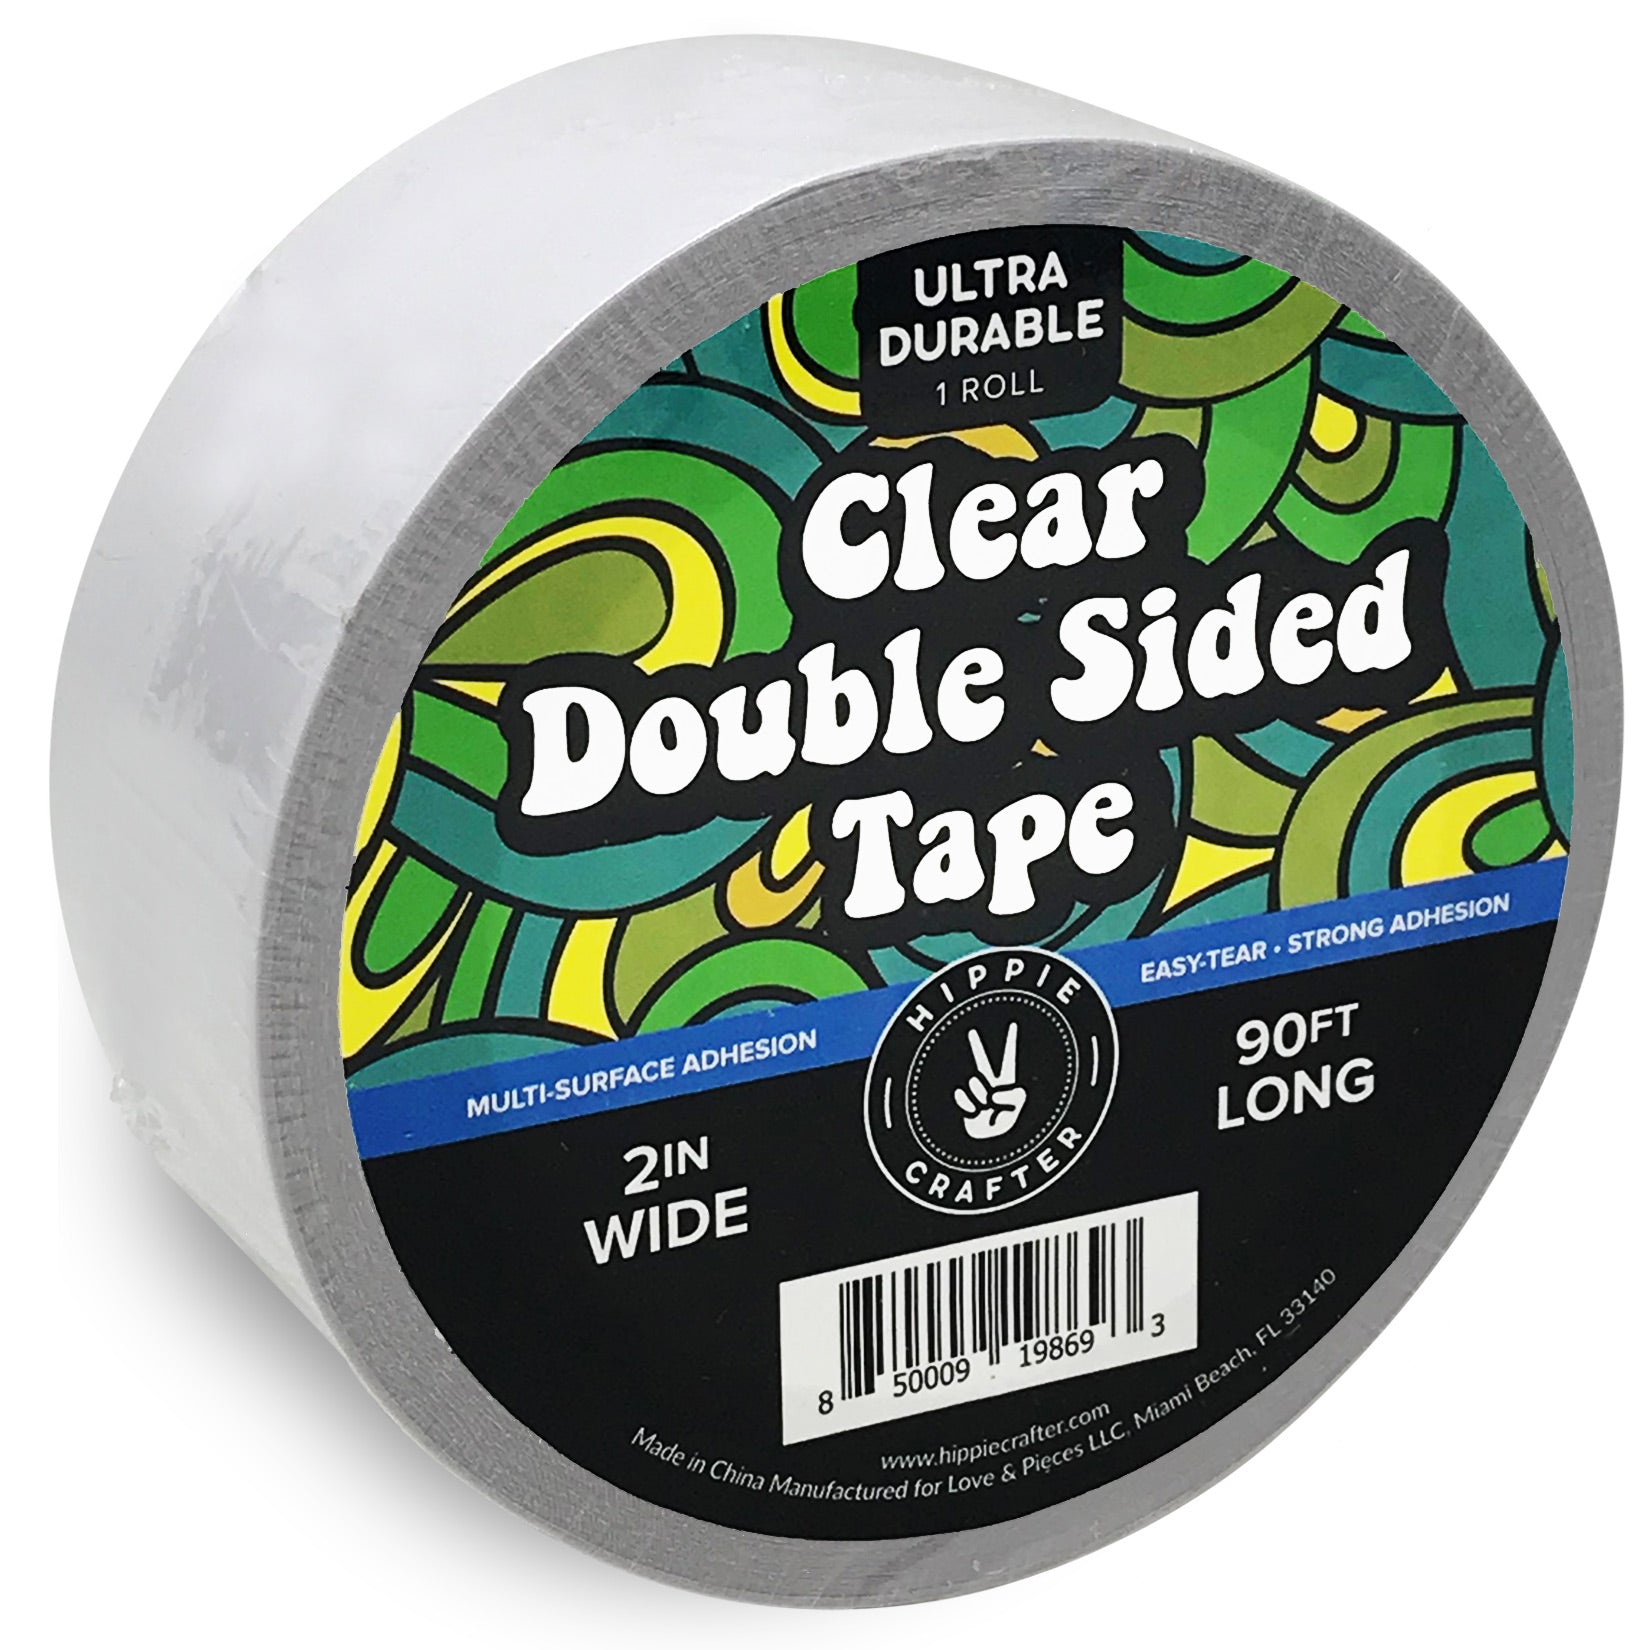 Two-sided tape product